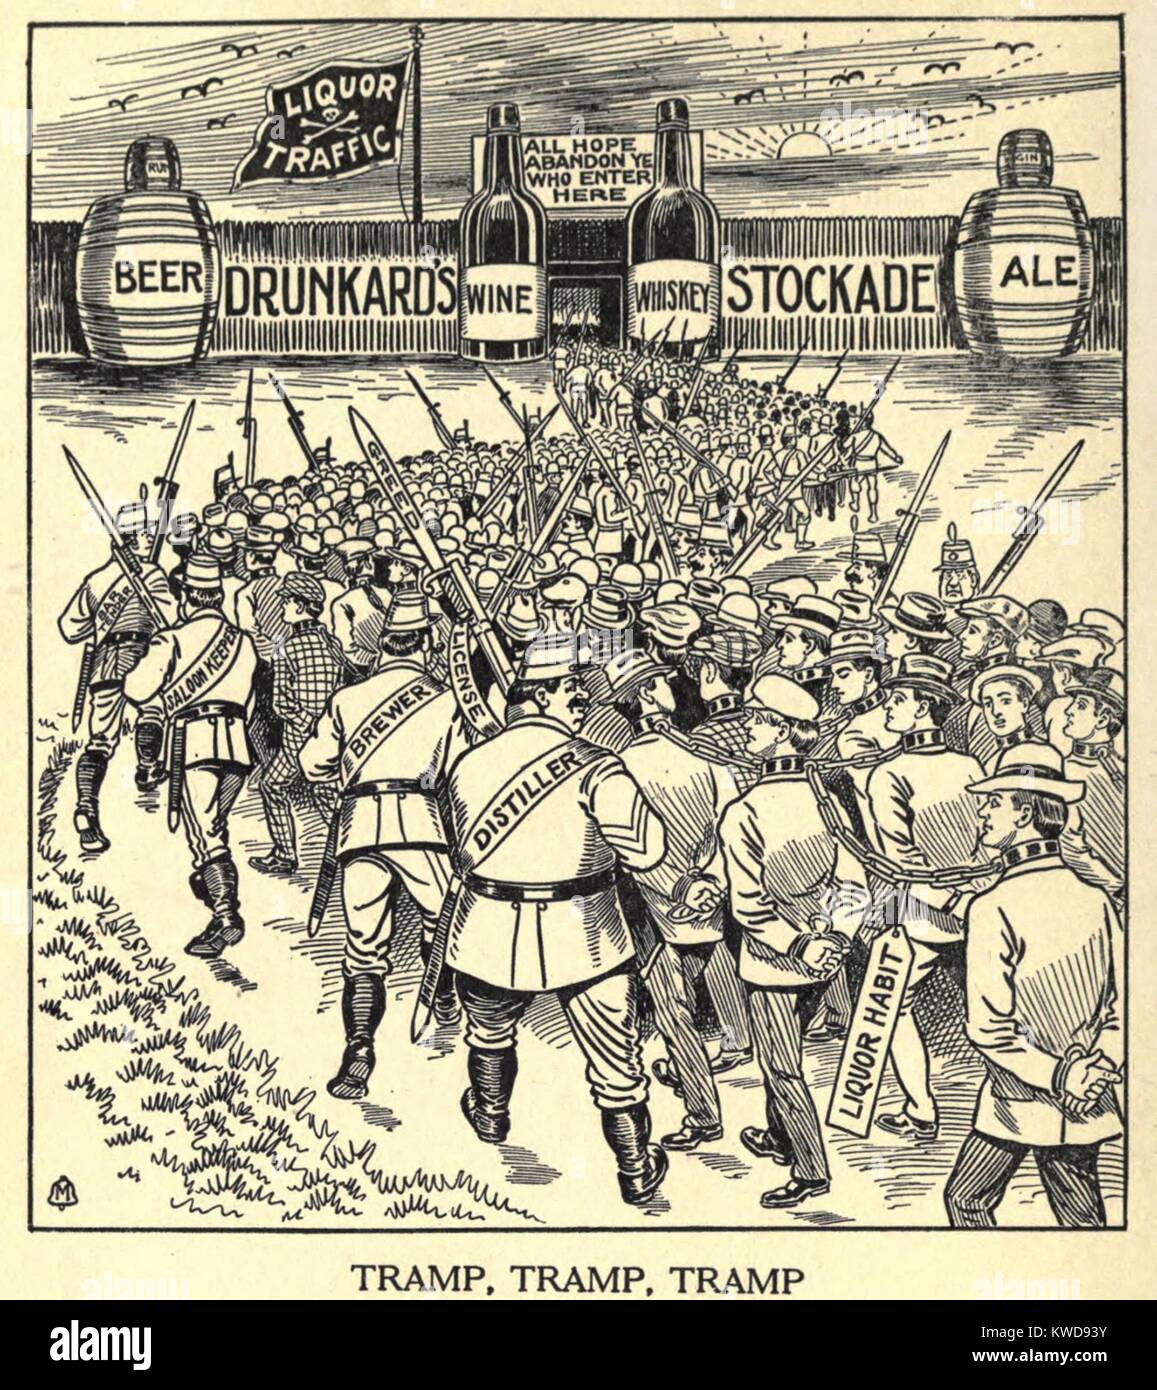 TRAMP, TRAMP, TRAMP. Cartoon of shackled men driven by distillers, brewers. And saloon keepers. All are headed to the 'Drunkard's Stockade.' From 'The Shadow of the Bottle,' 1915 book advocating nation-wide prohibition of the liquor traffic (BSLOC 2016 8 60) Stock Photo